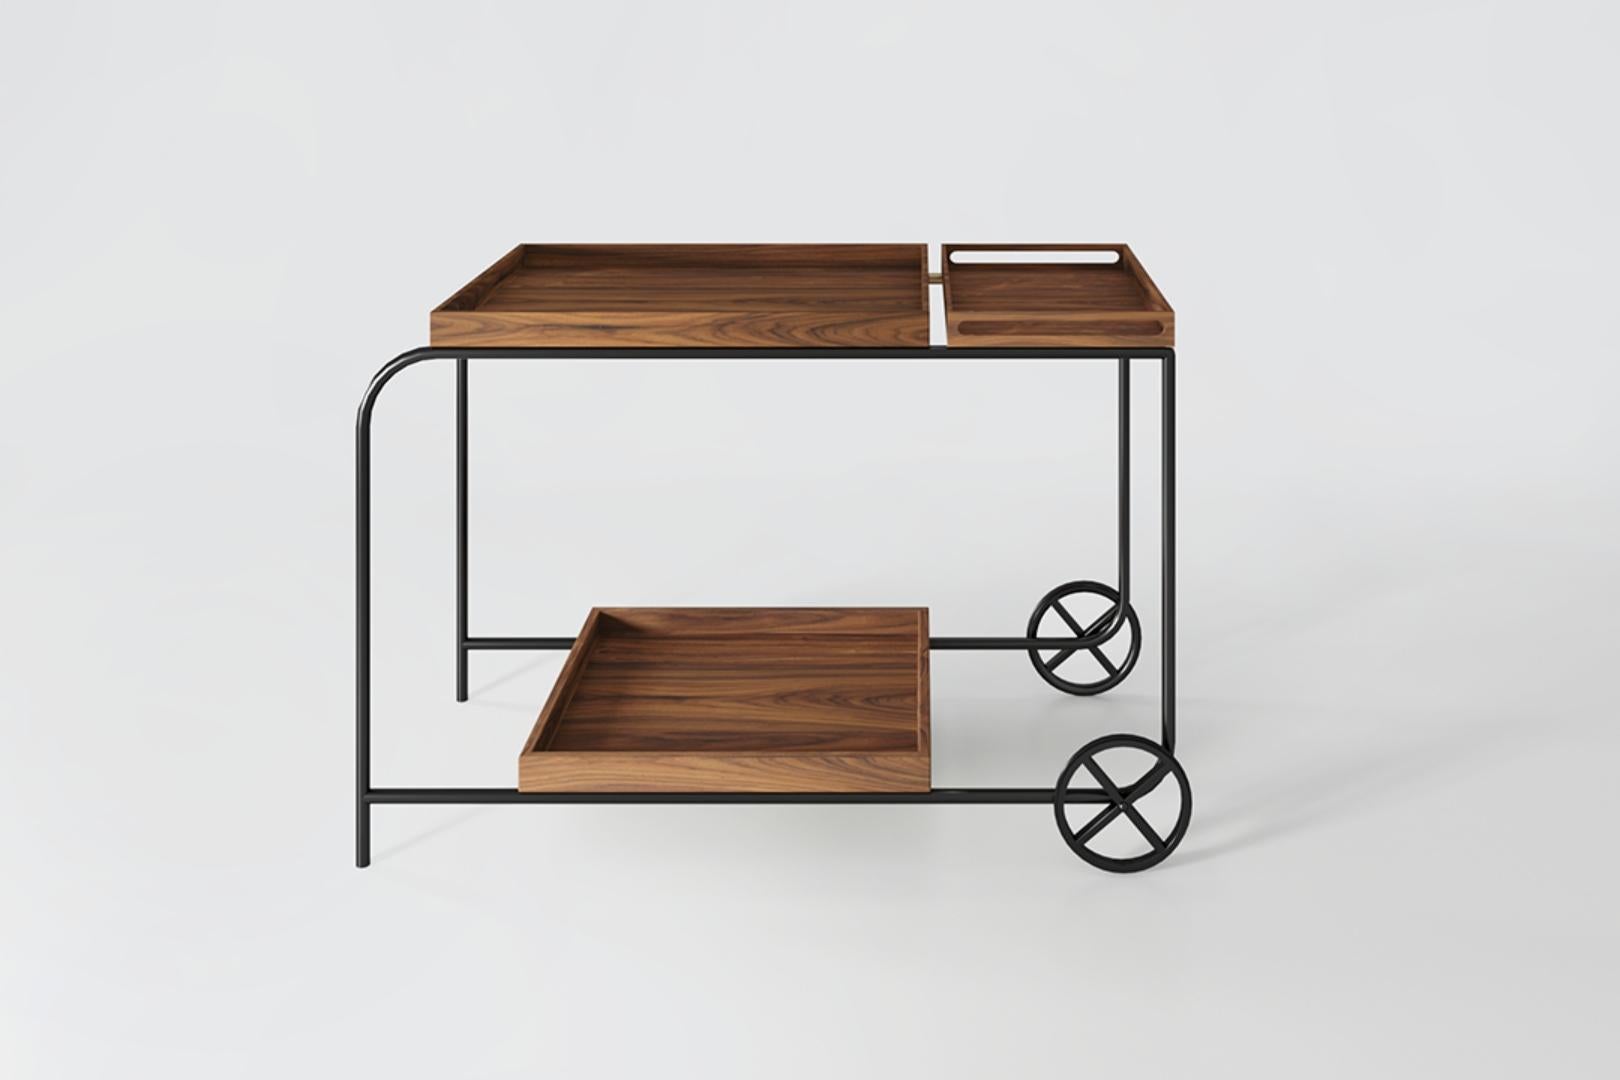 With the Pedro trolley, Alessandra pays a loving tribute to her father. The light and functional piece has an interesting detail: the smaller top tray is movable, allowing you to use it for serving.
The structure of the sculptural piece is made of